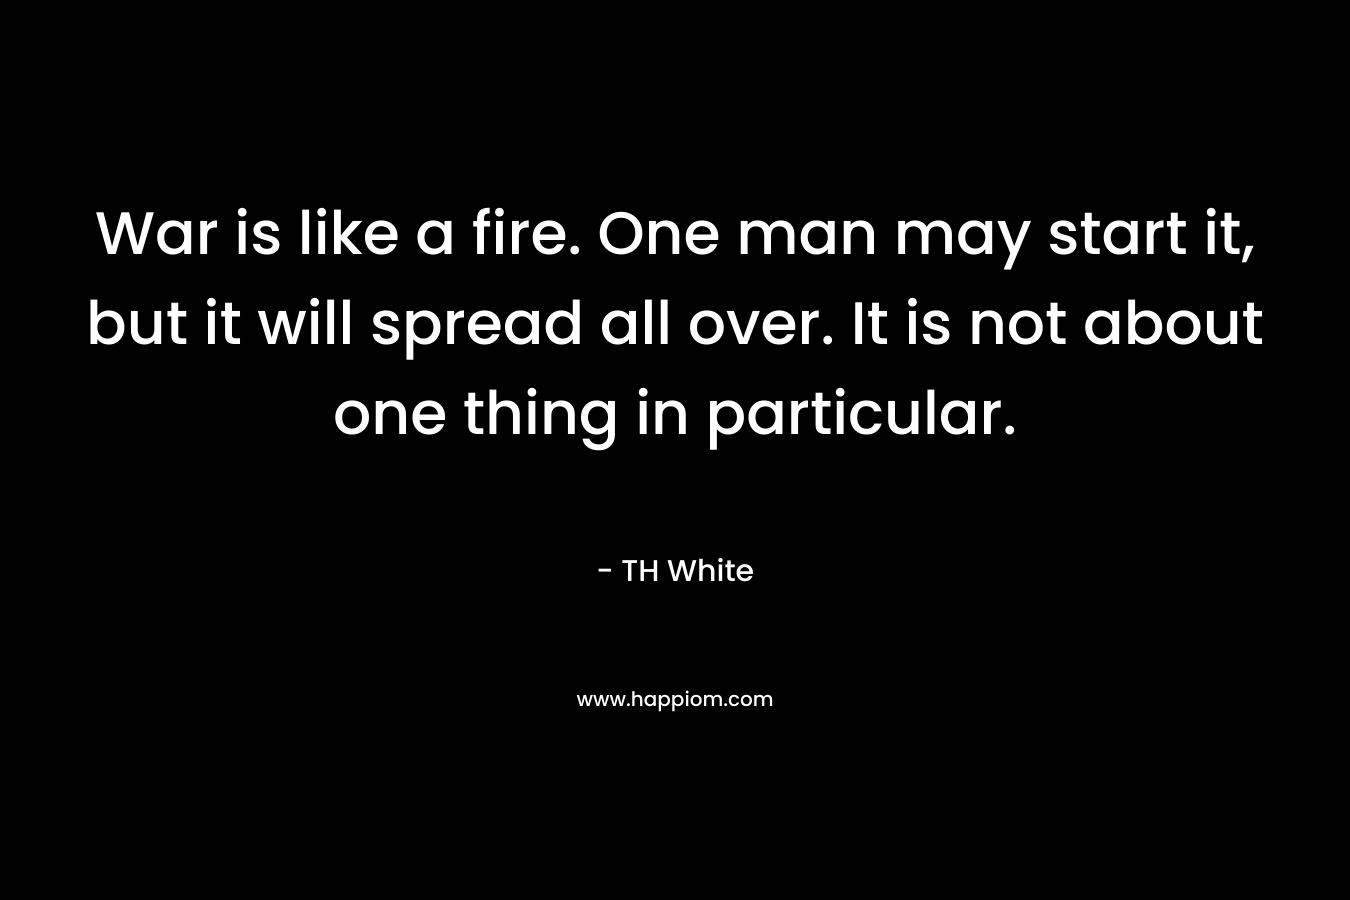 War is like a fire. One man may start it, but it will spread all over. It is not about one thing in particular.